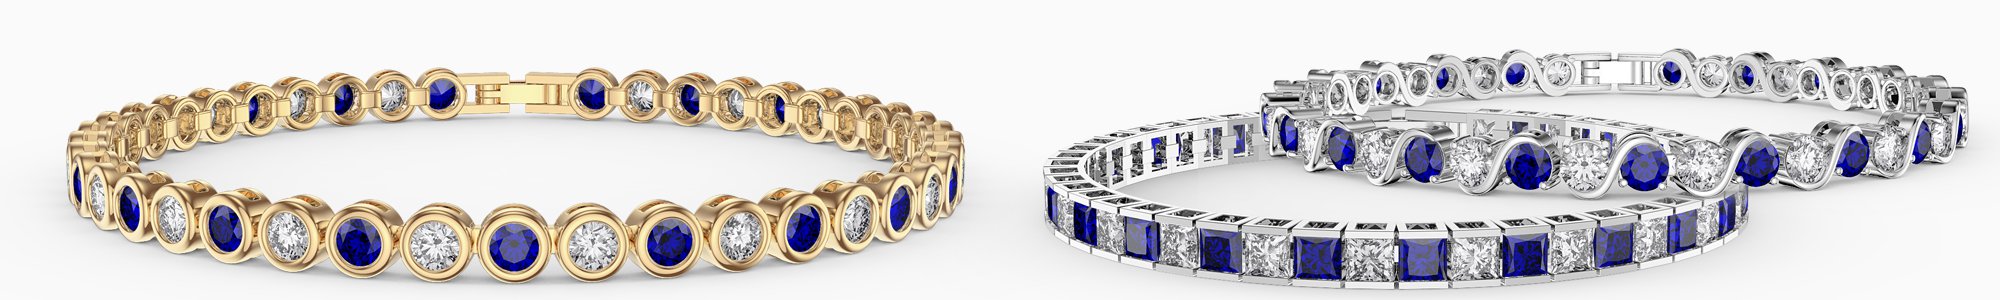 Shop Sapphire Bracelets by Jian London. Buy direct and save from our wide selection of Sapphire Bracelets at the Jian London jewellery Store. Free UK Delivery